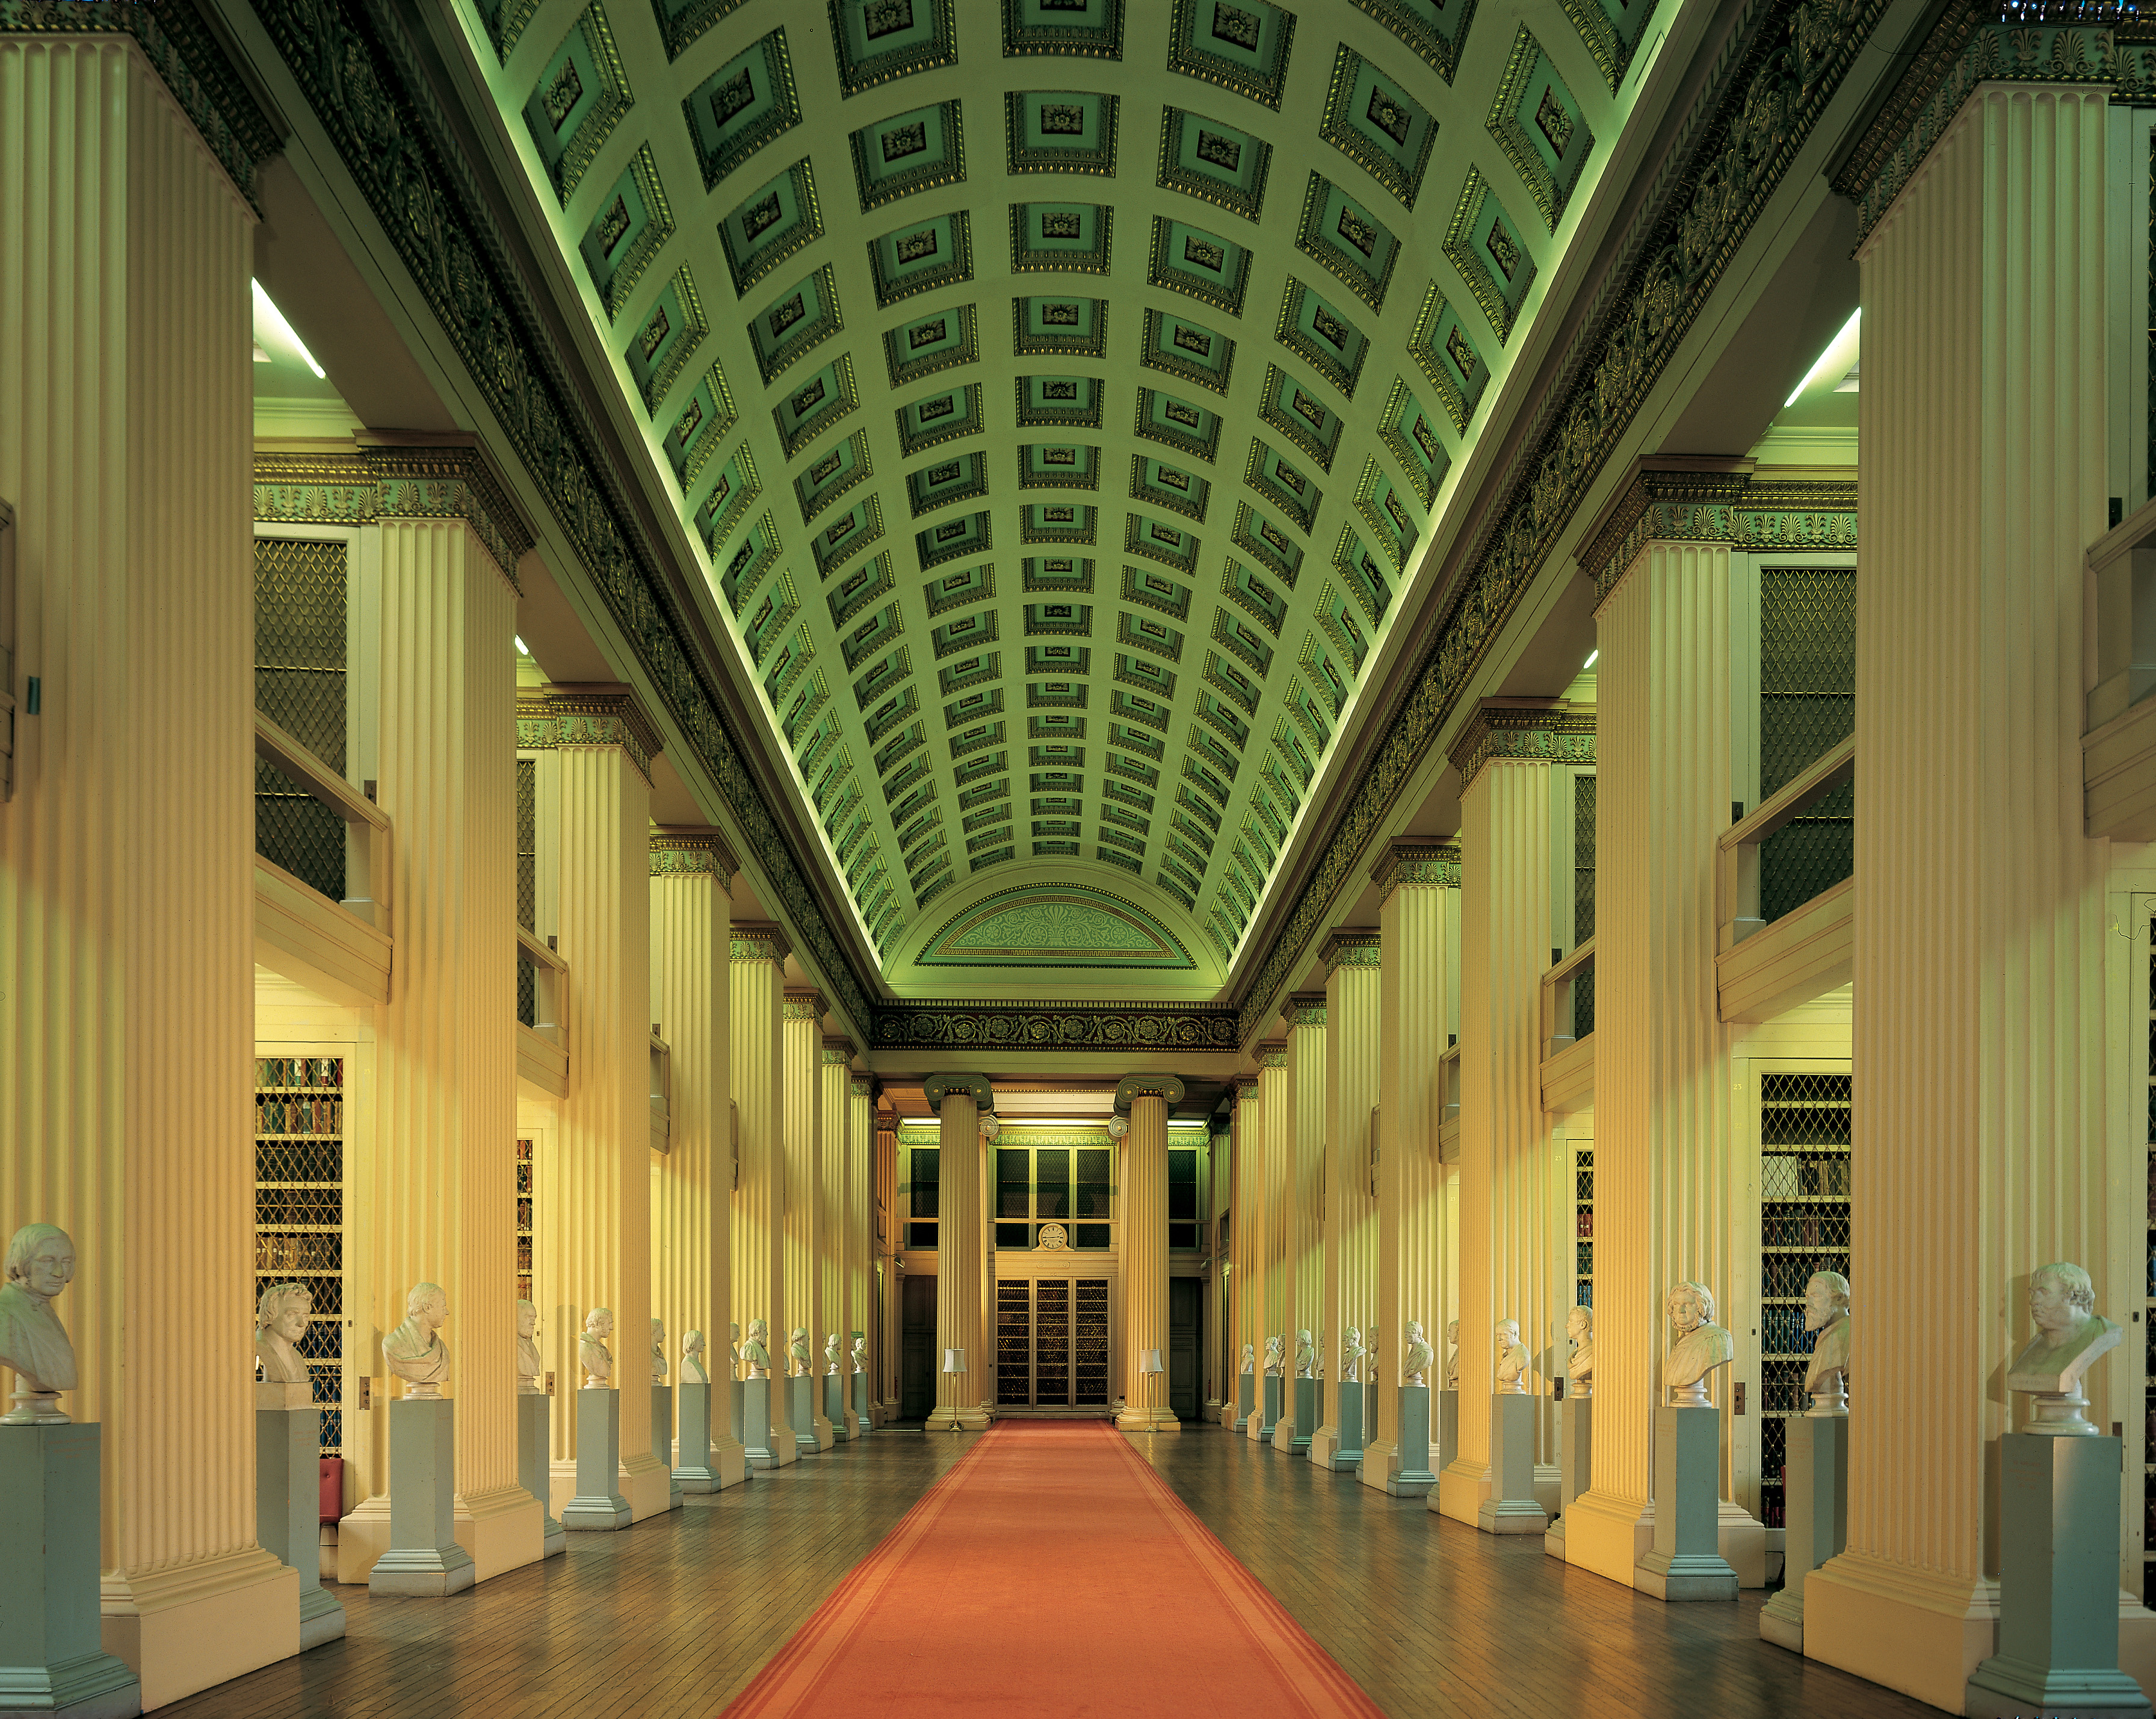 Photograph of the Playfair Library at the University of Edinburgh